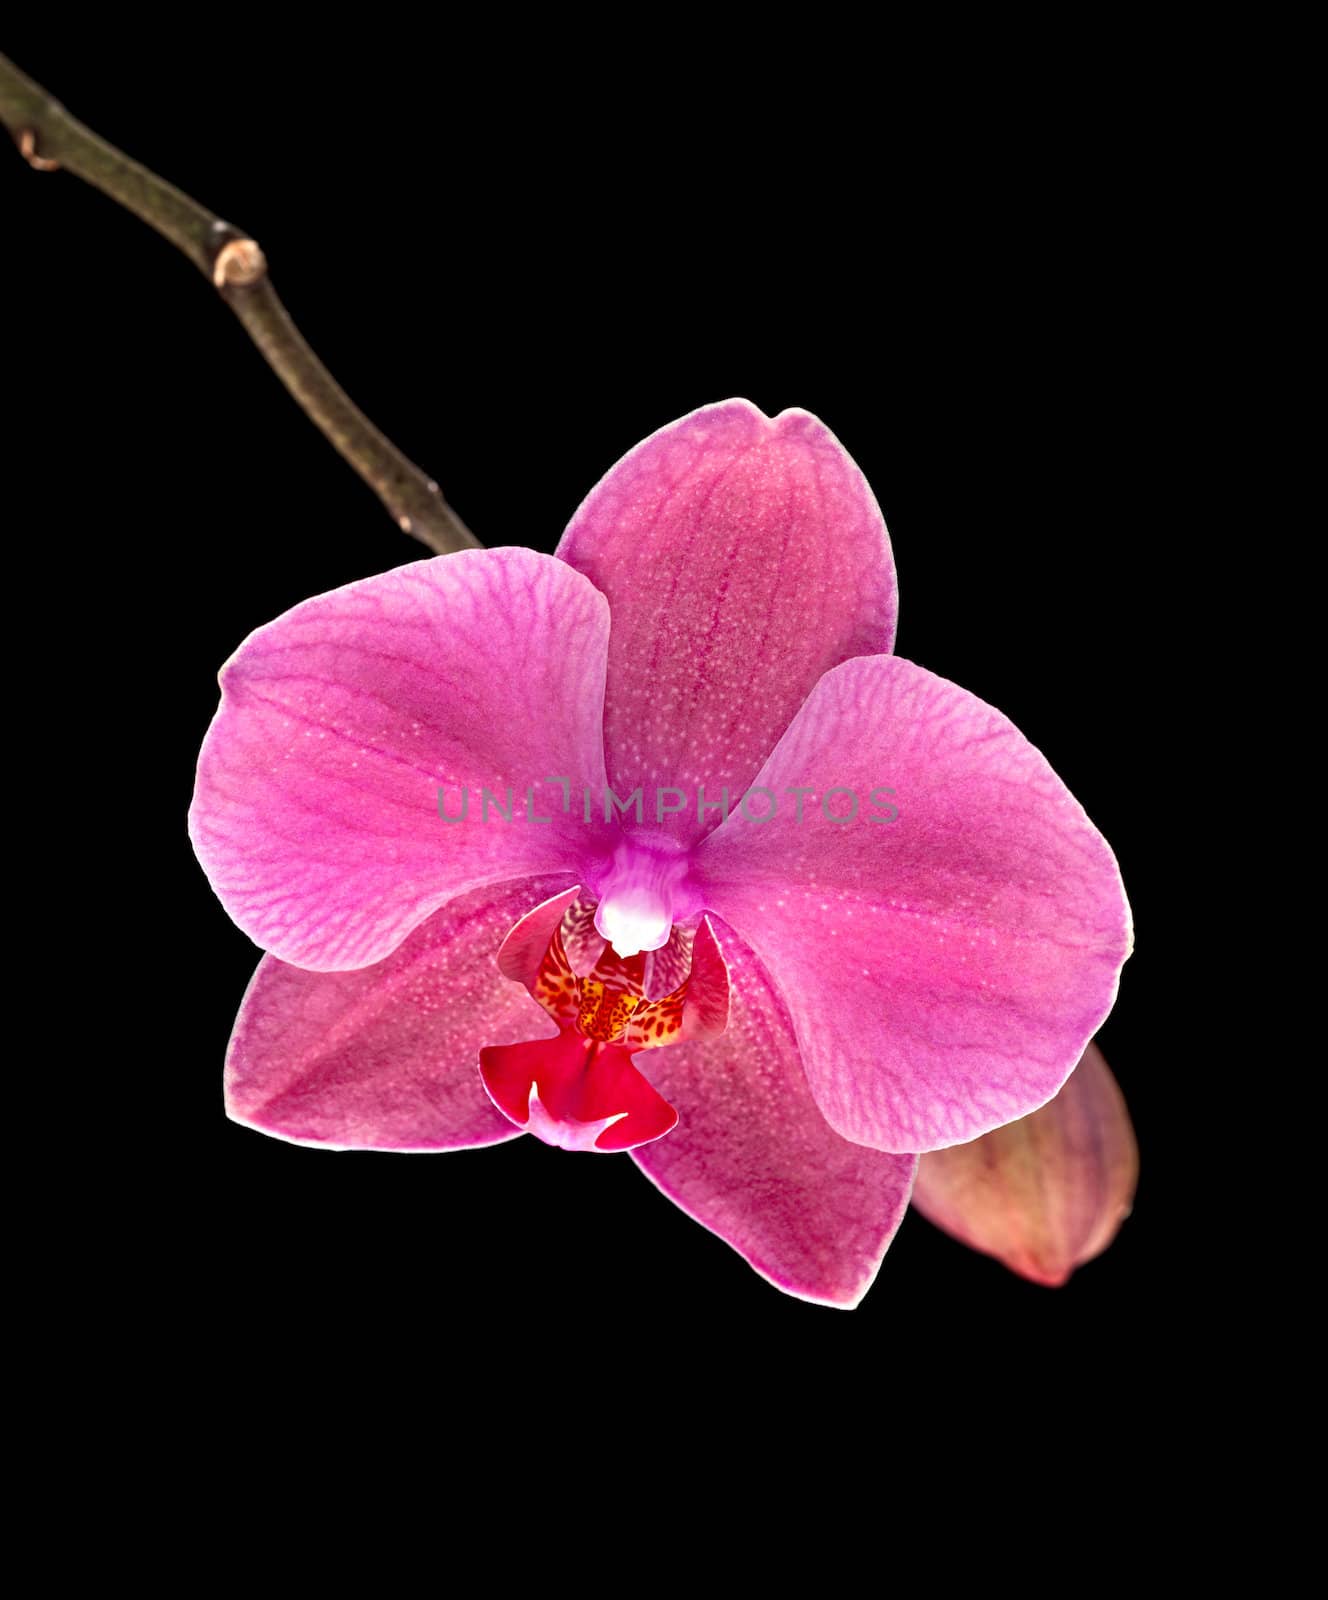 Colorful pink orchid on black background